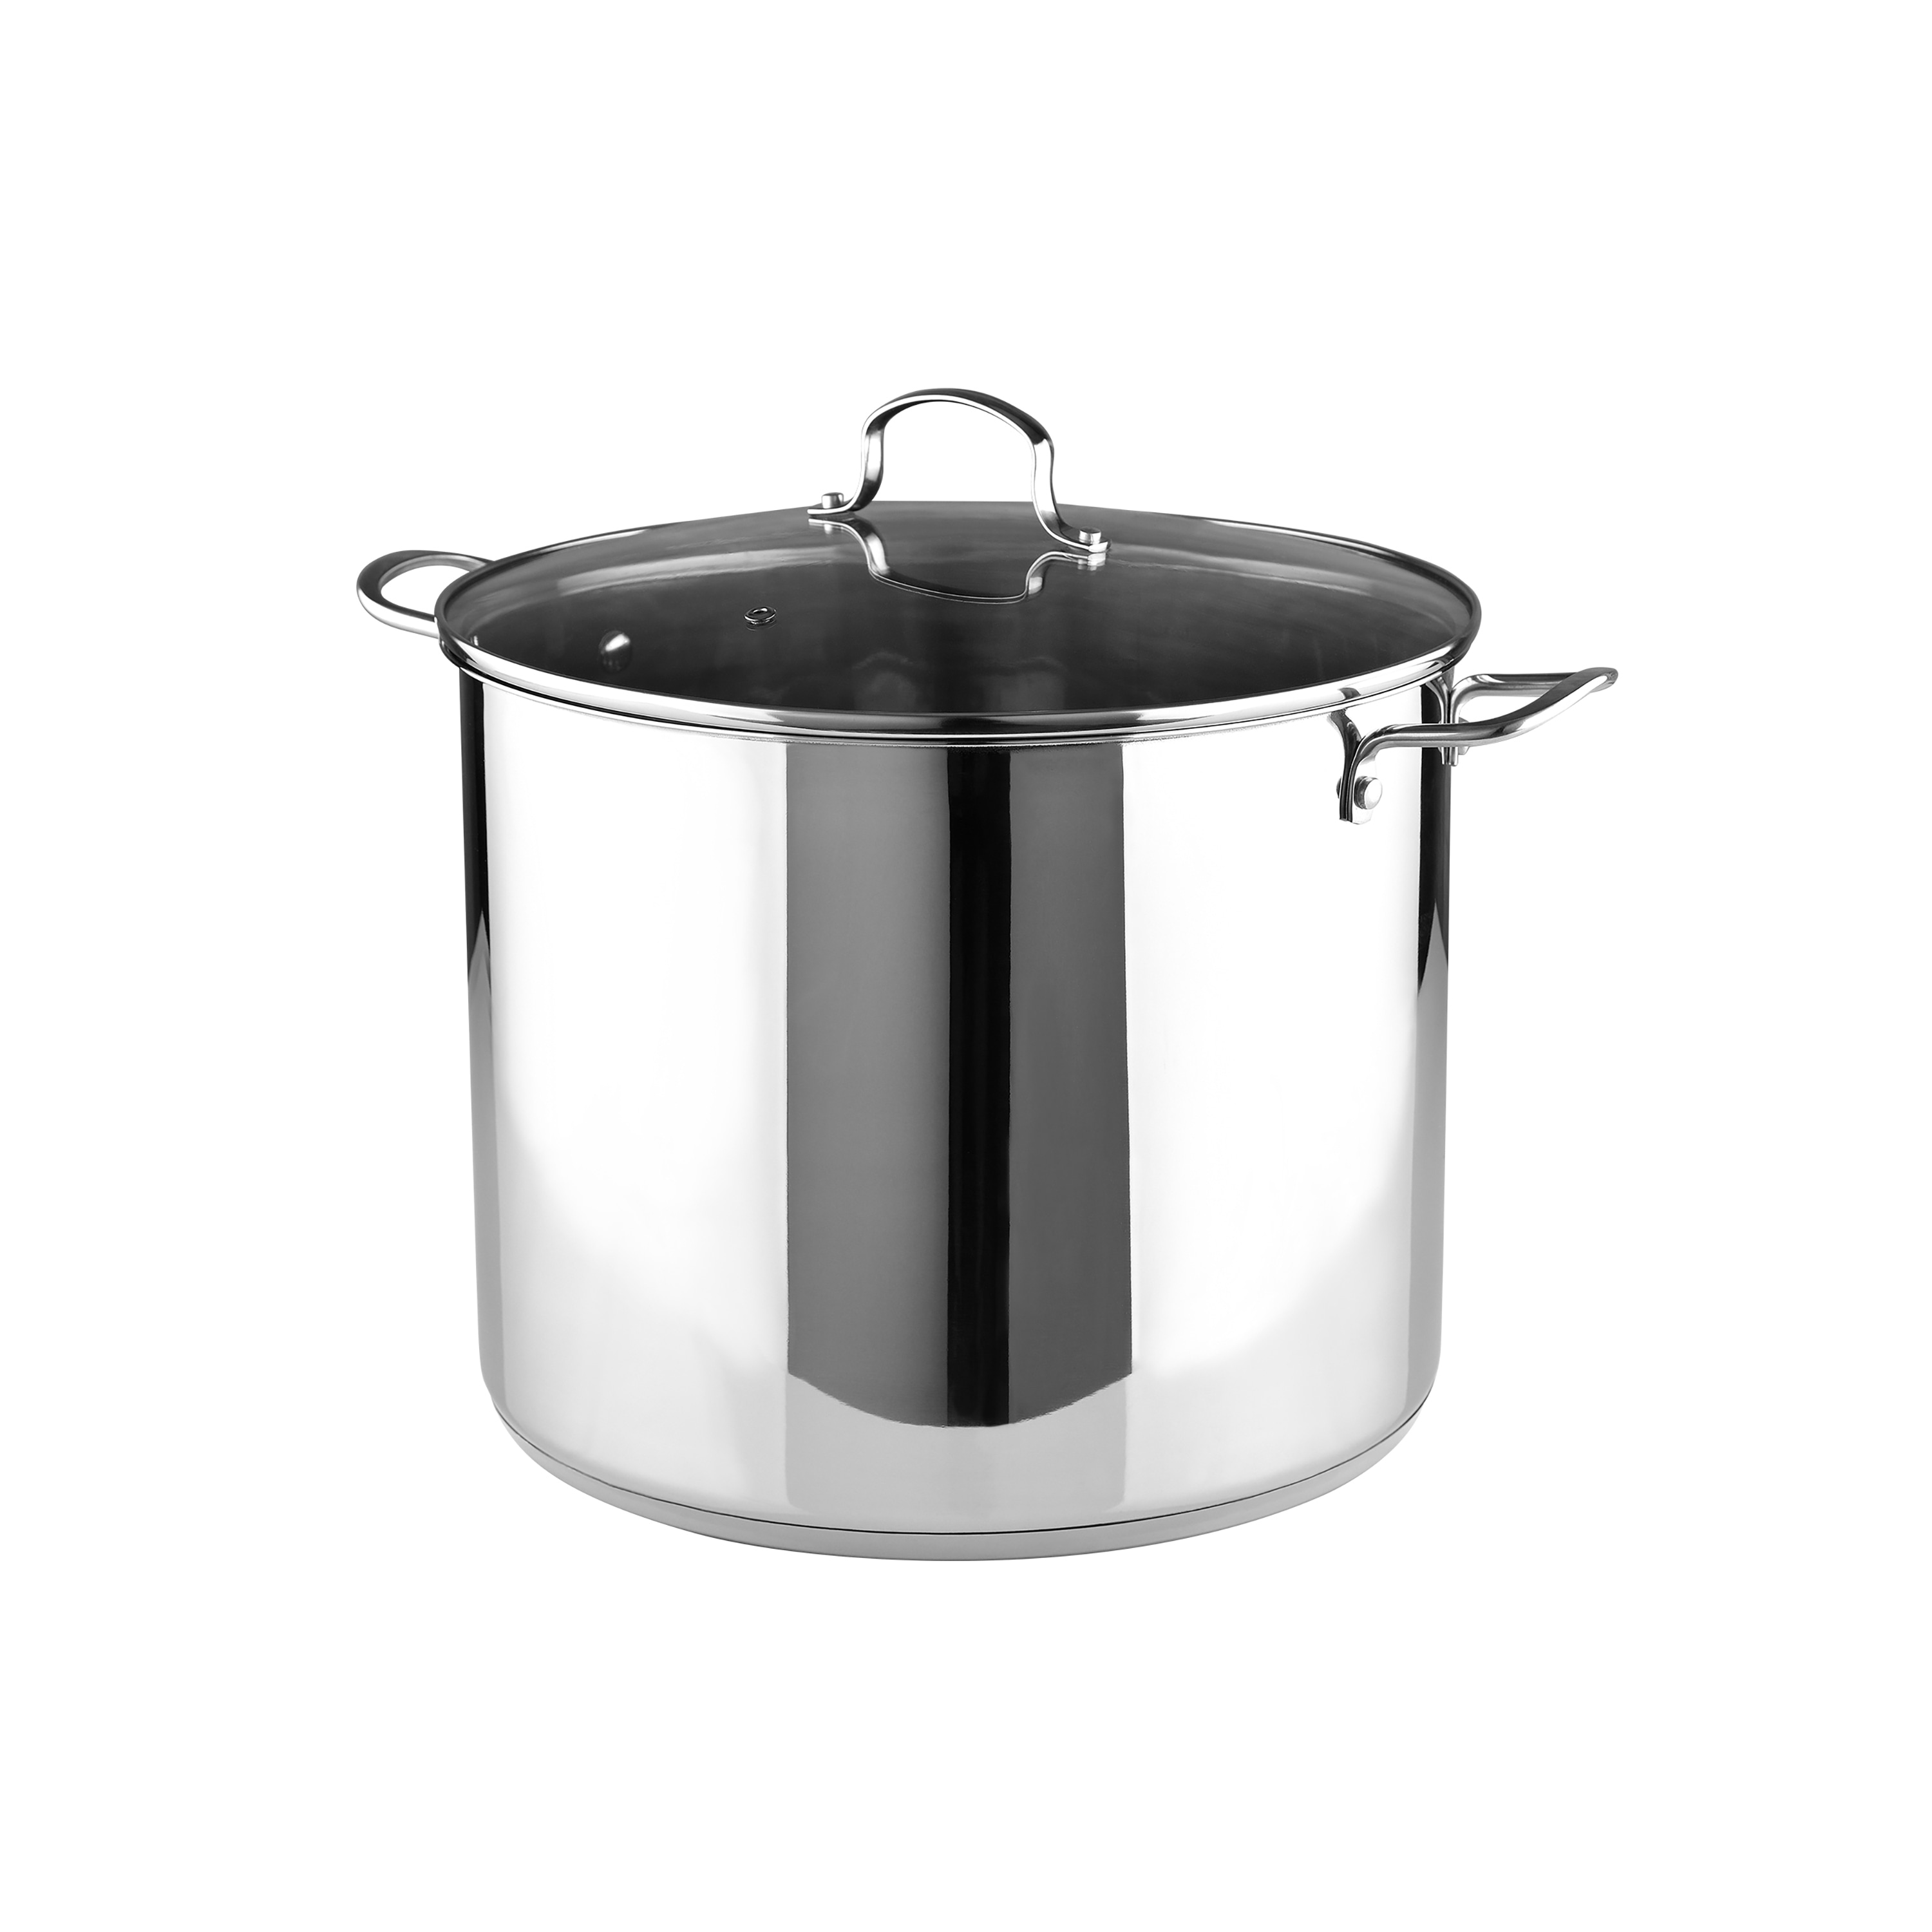 https://ak1.ostkcdn.com/images/products/is/images/direct/c4491002959f3c29bb55a3ac96fb421bf8c53d26/Bergner-Essentials-BGUS10125STS-Stainless-Steel-Stock-Pot-with-Tempered-Glass-Lid-12-Quart-Pot.jpg